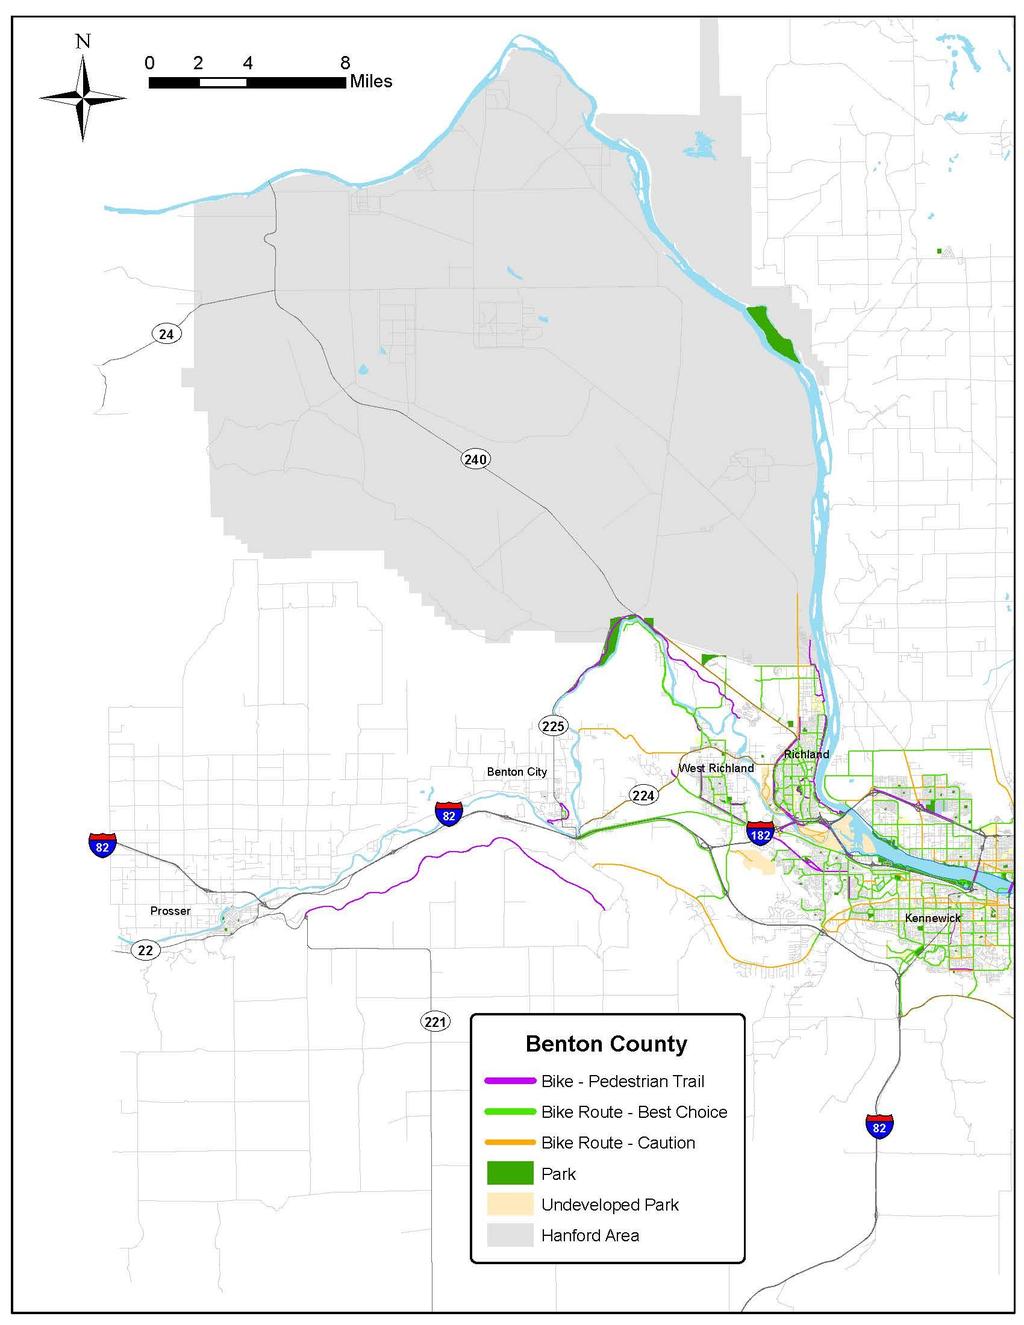 Map 1: Benton County Parks and